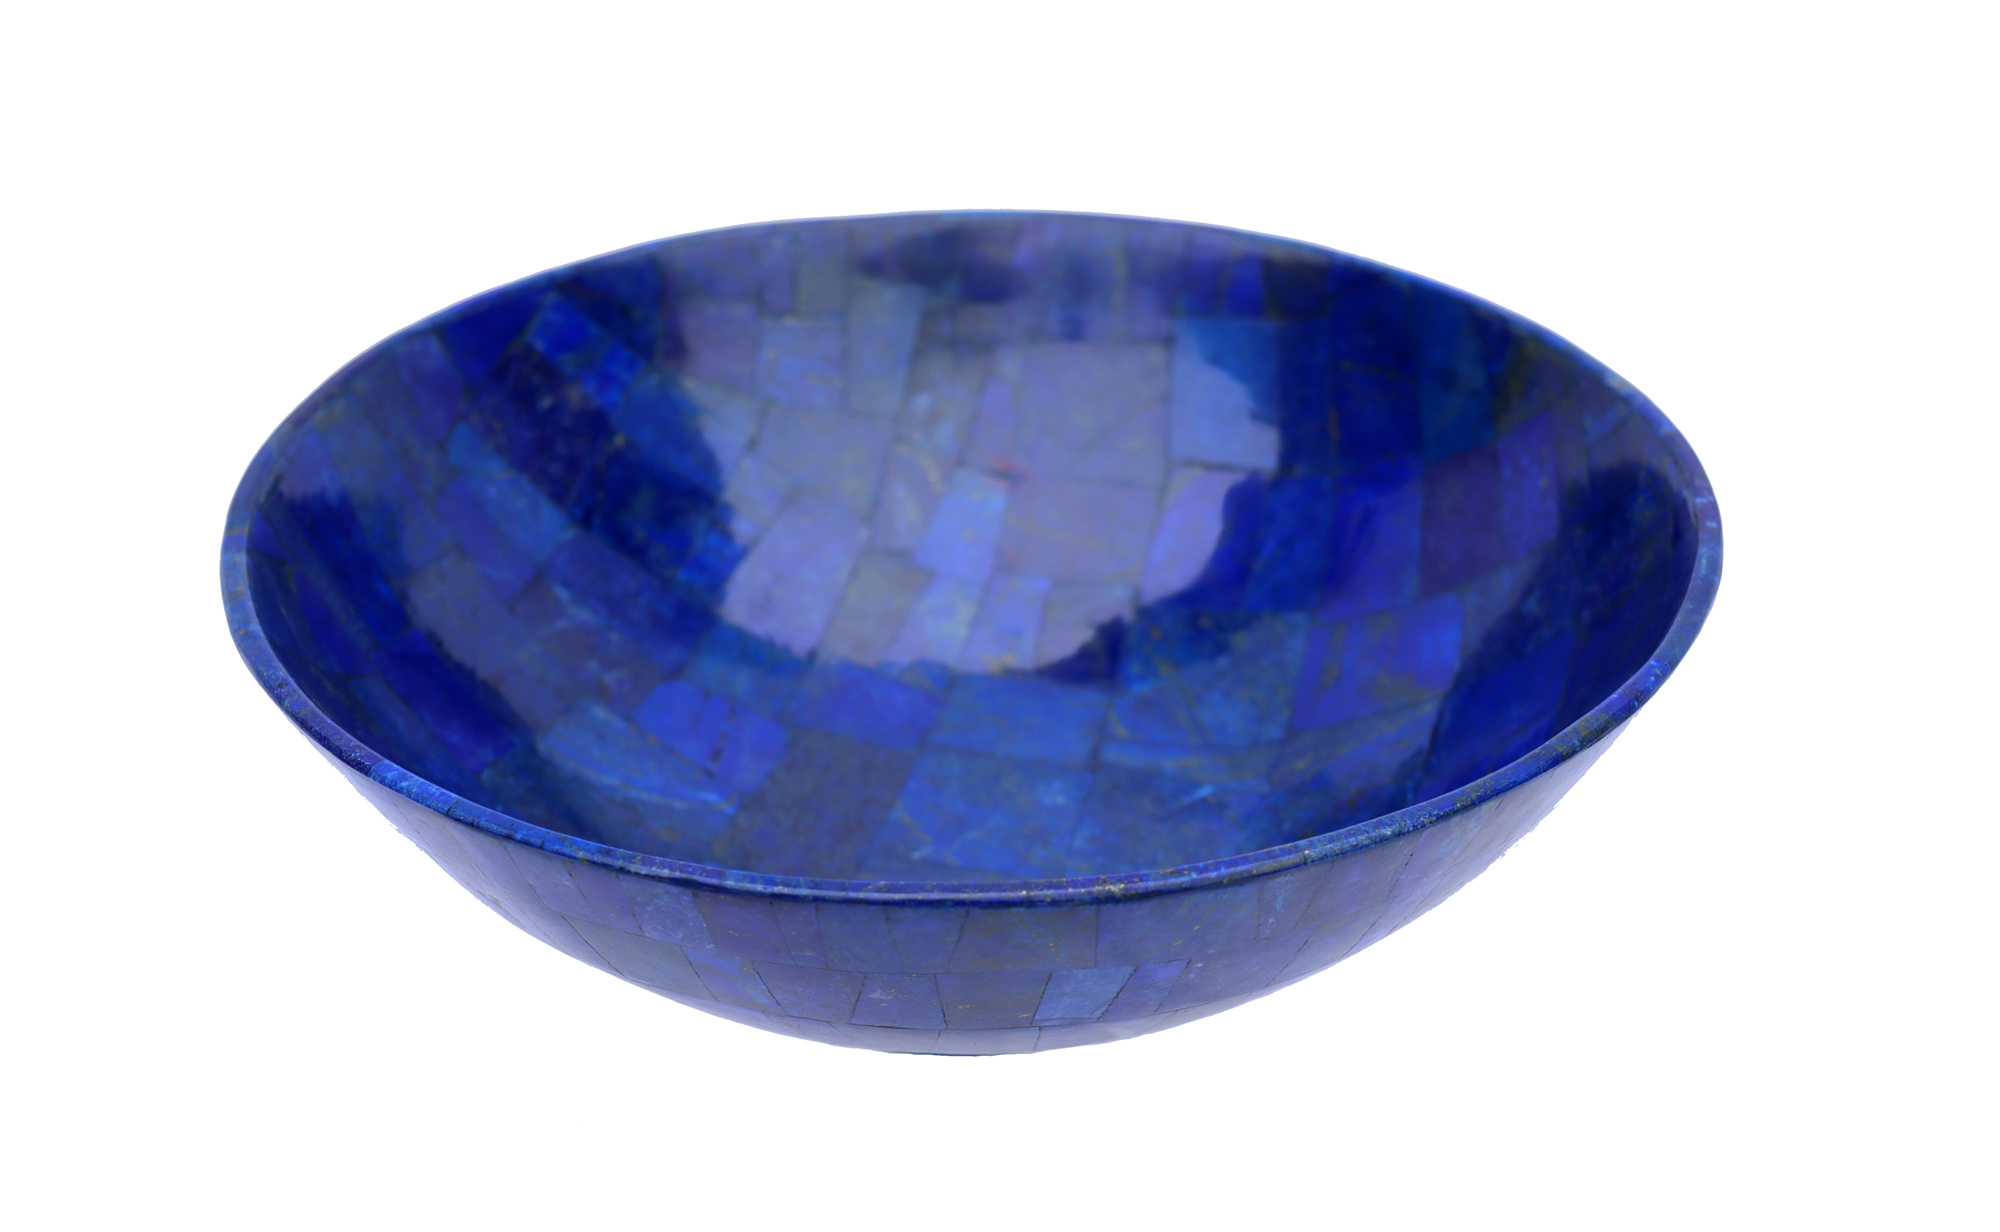 26 cm diameter Hand Crafted  Lapis Lazuli Gemstone Bowl cup from Afghanistan  L/23